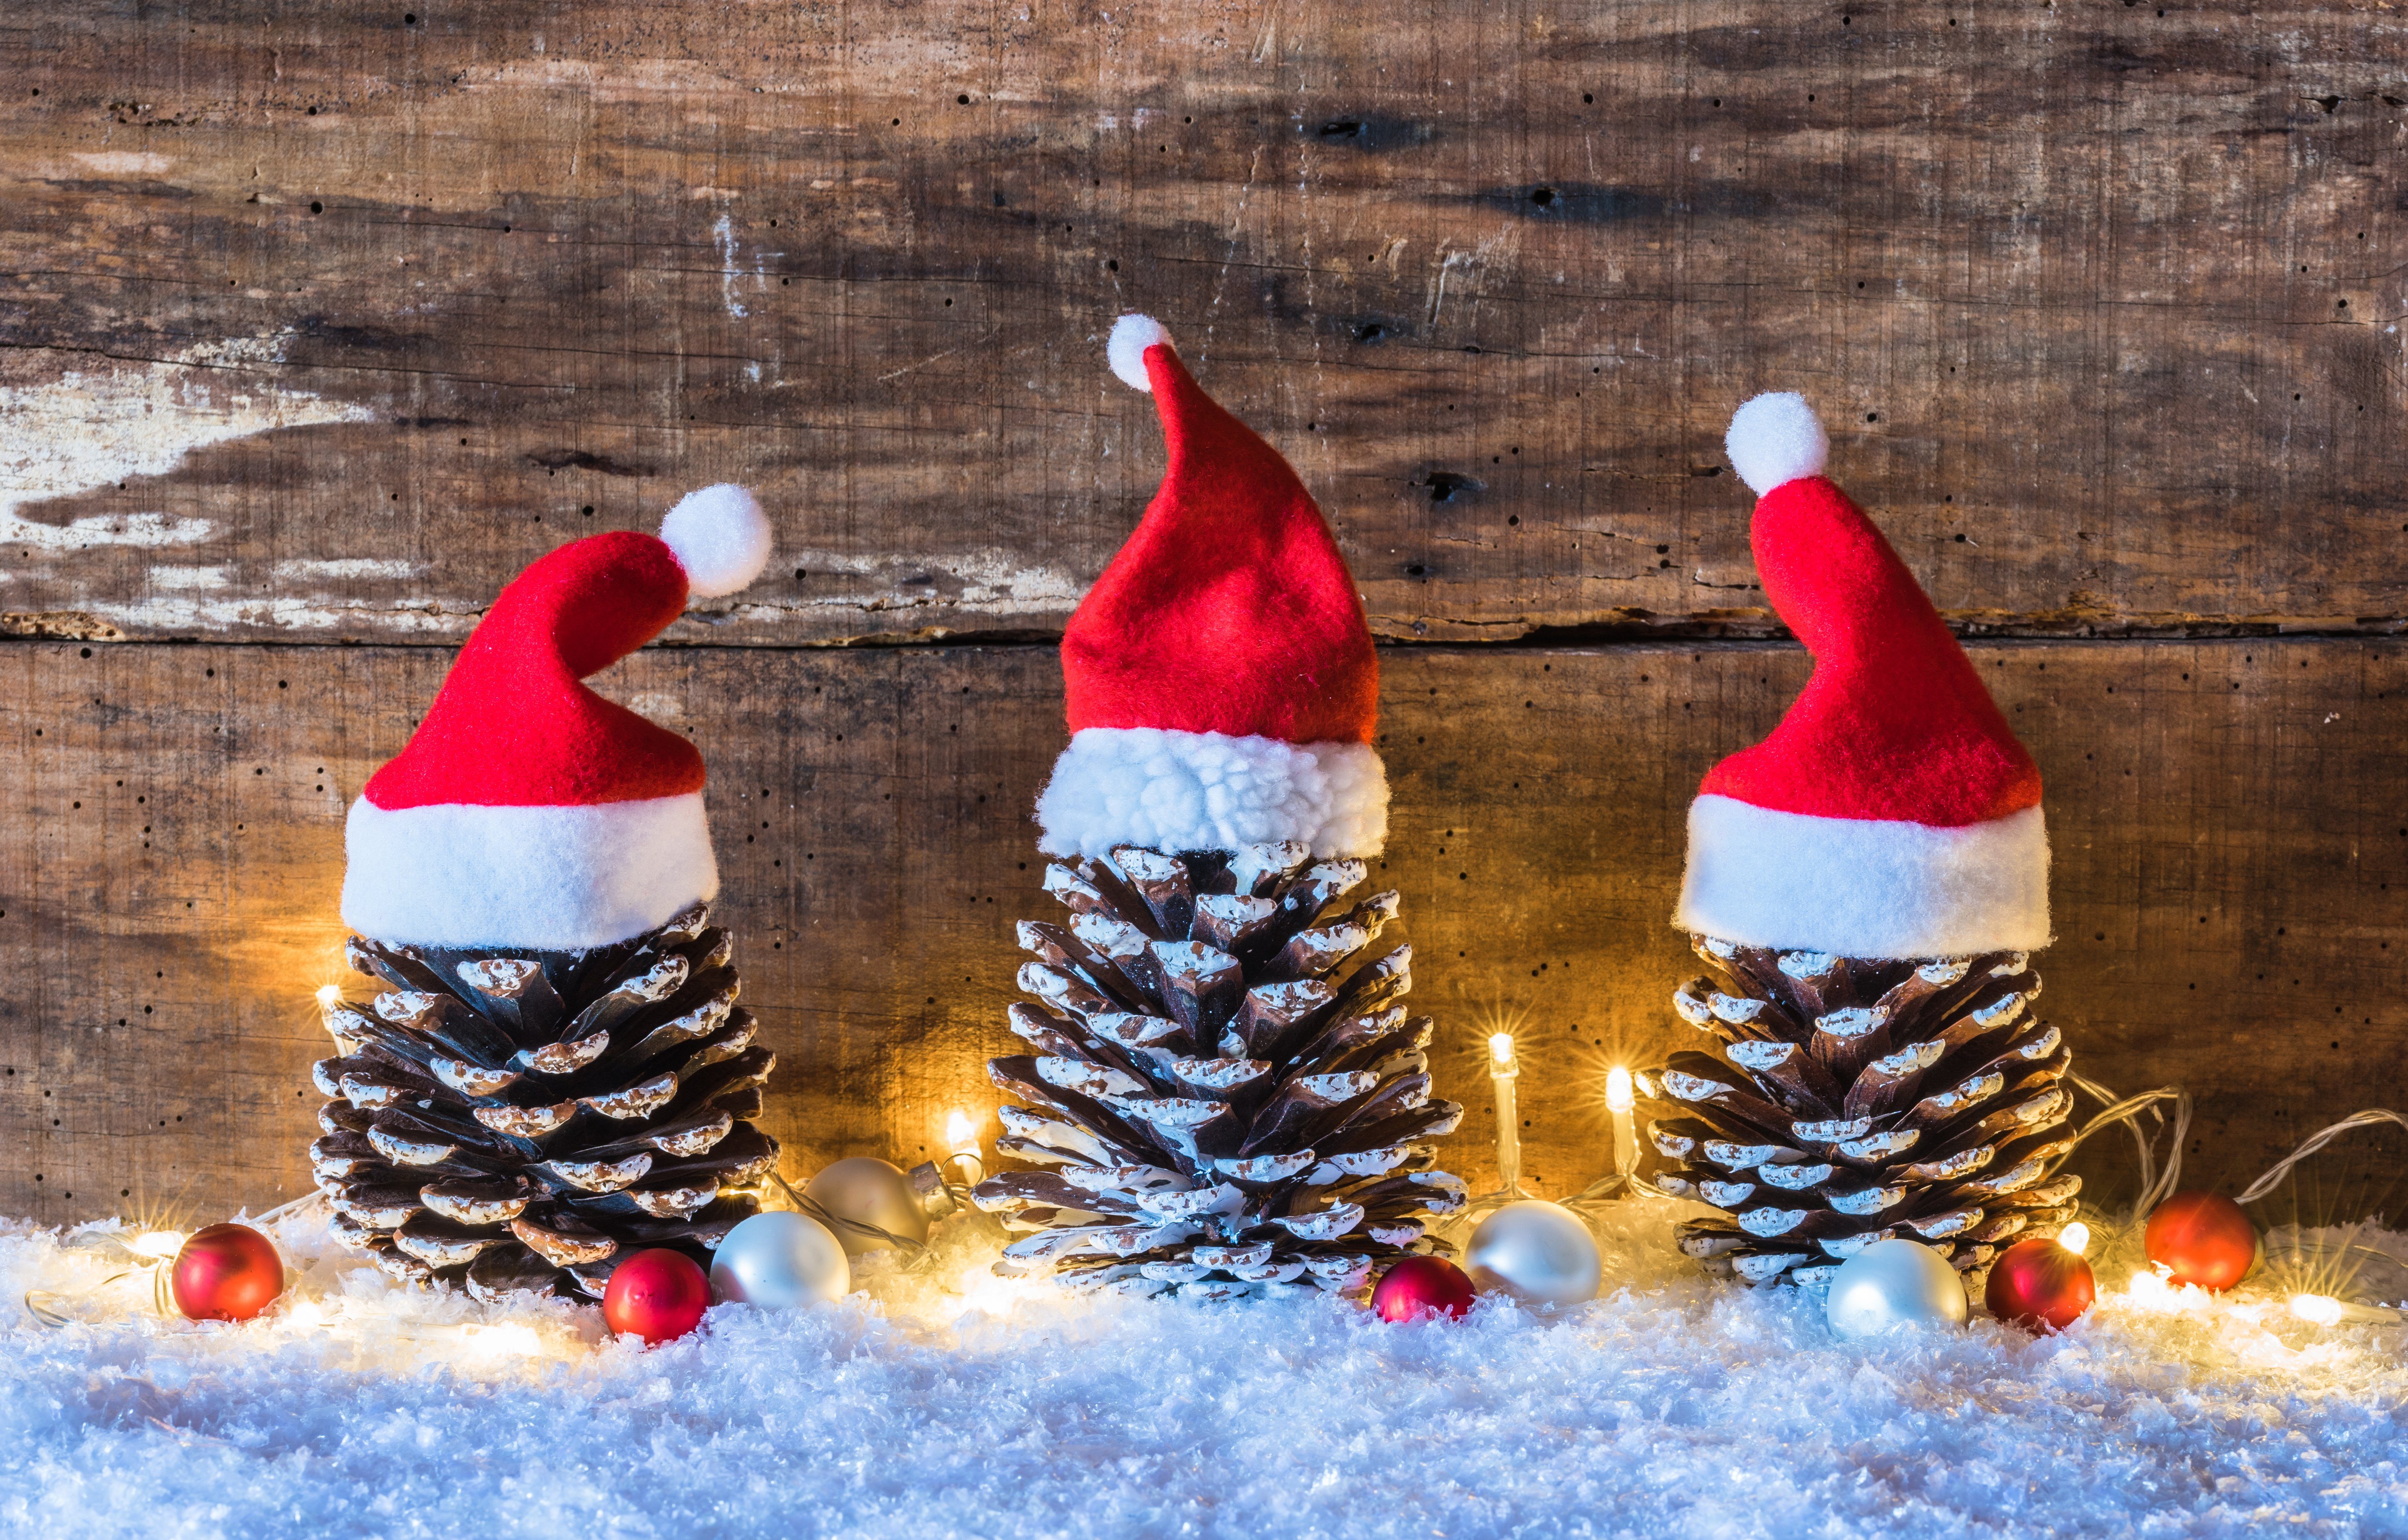 Christmas season, rustic decoration, Santa hats on pine cones with lights at snow and brown wooden background.